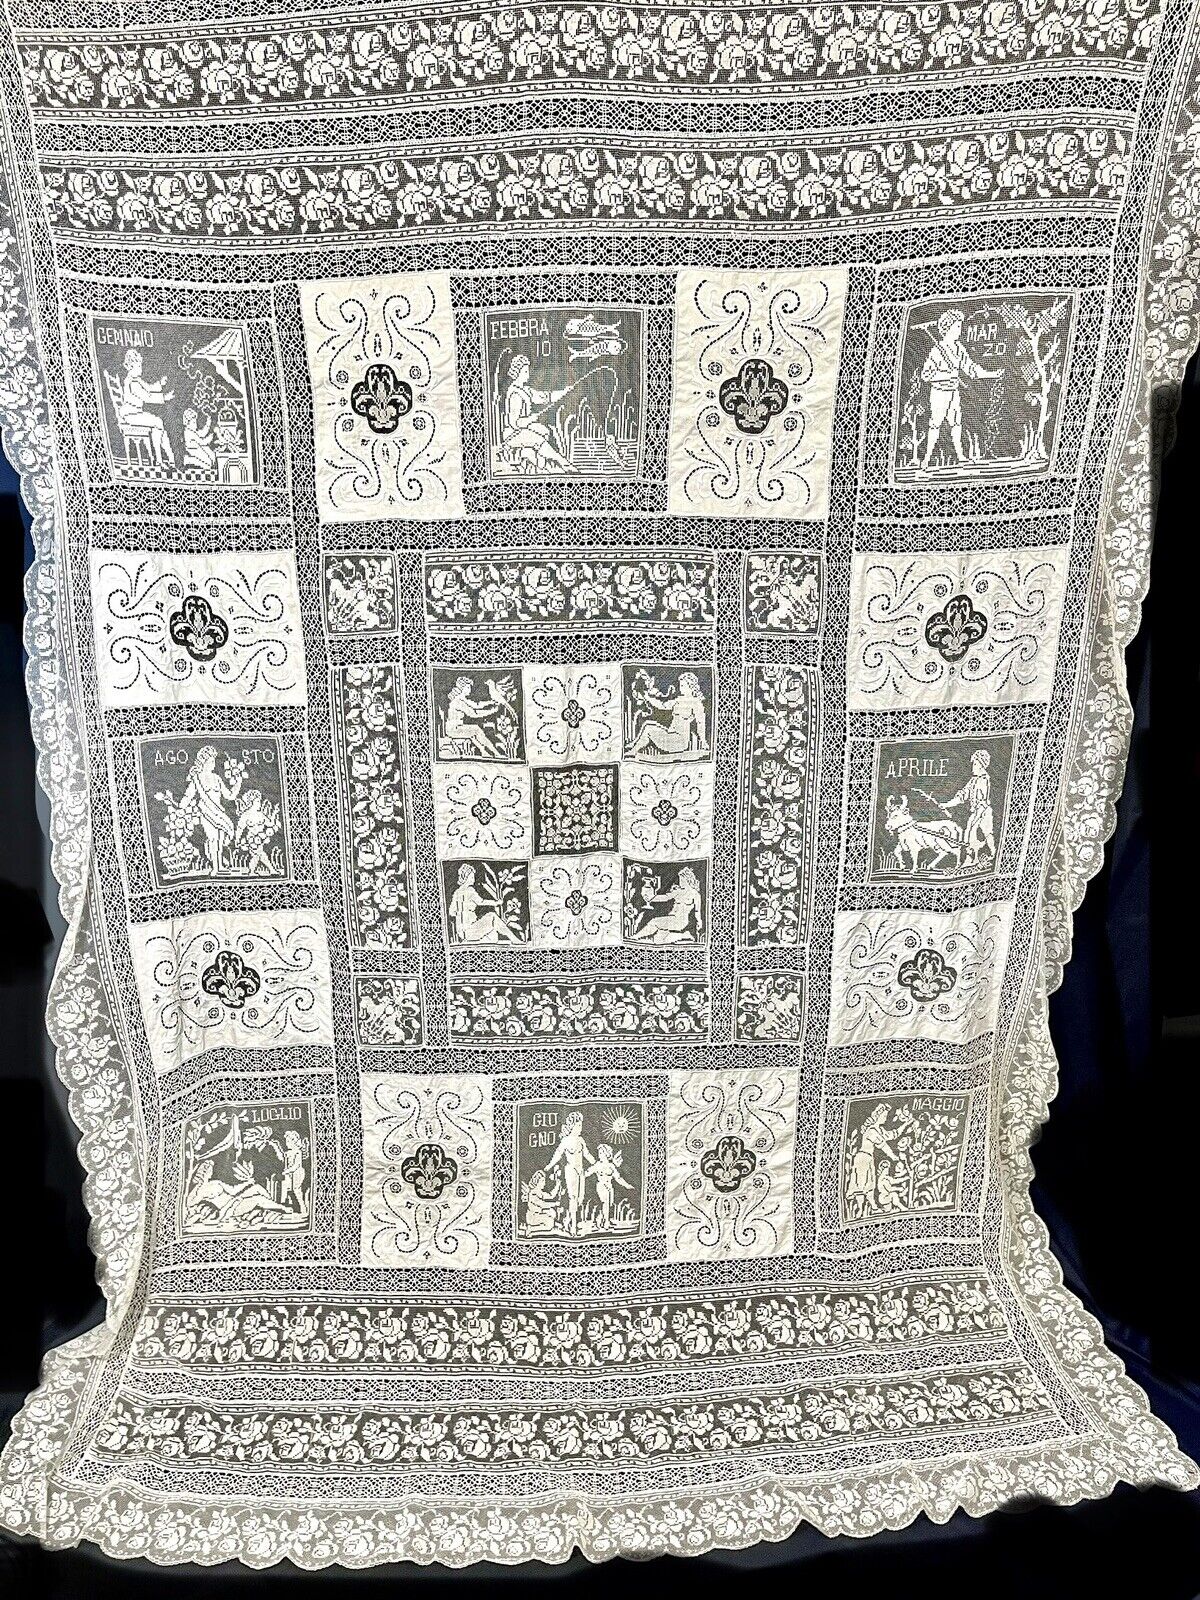 Antique Italian Tape Lace Tablecloth With Figural Scenes of Months 88x64 Inches